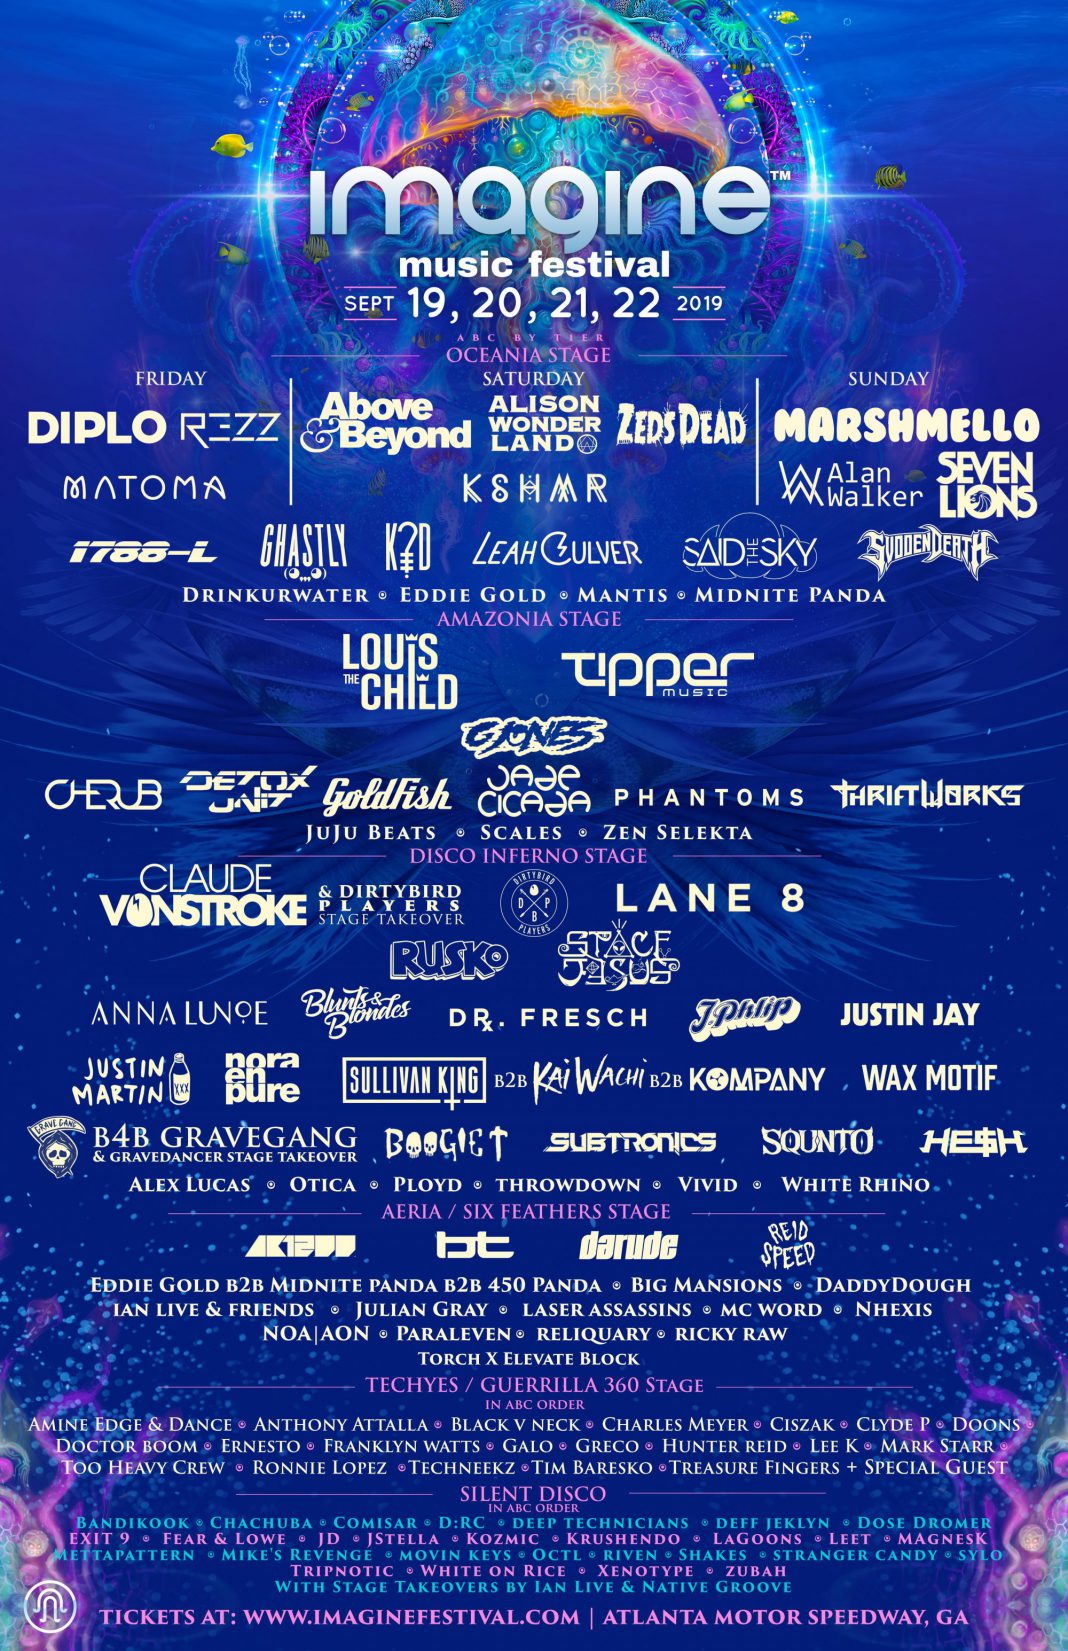 Imagine Music Festival Releases Full 2019 Lineup; Adds Fourth Day EDM